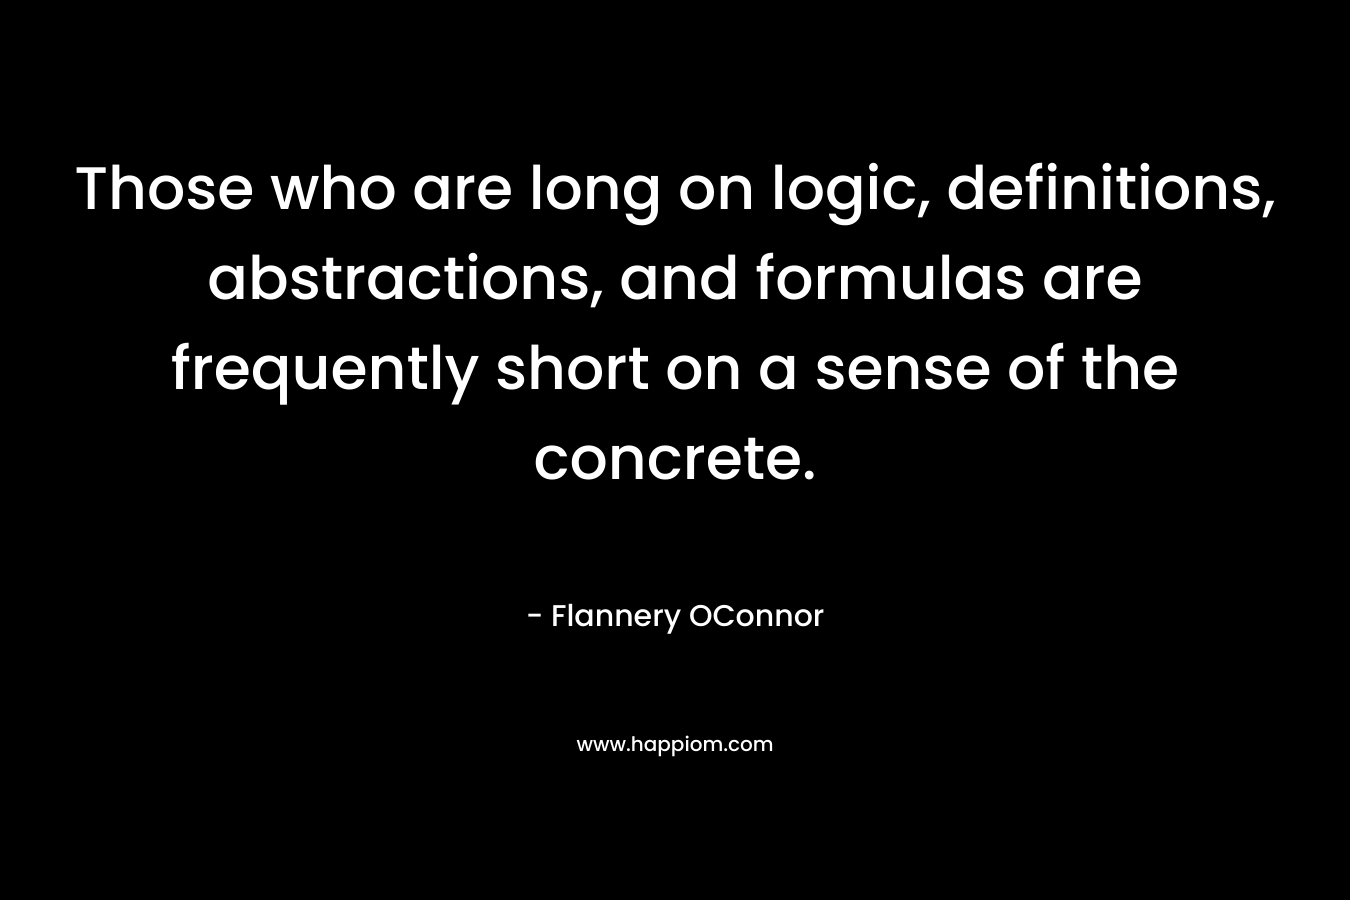 Those who are long on logic, definitions, abstractions, and formulas are frequently short on a sense of the concrete. – Flannery OConnor